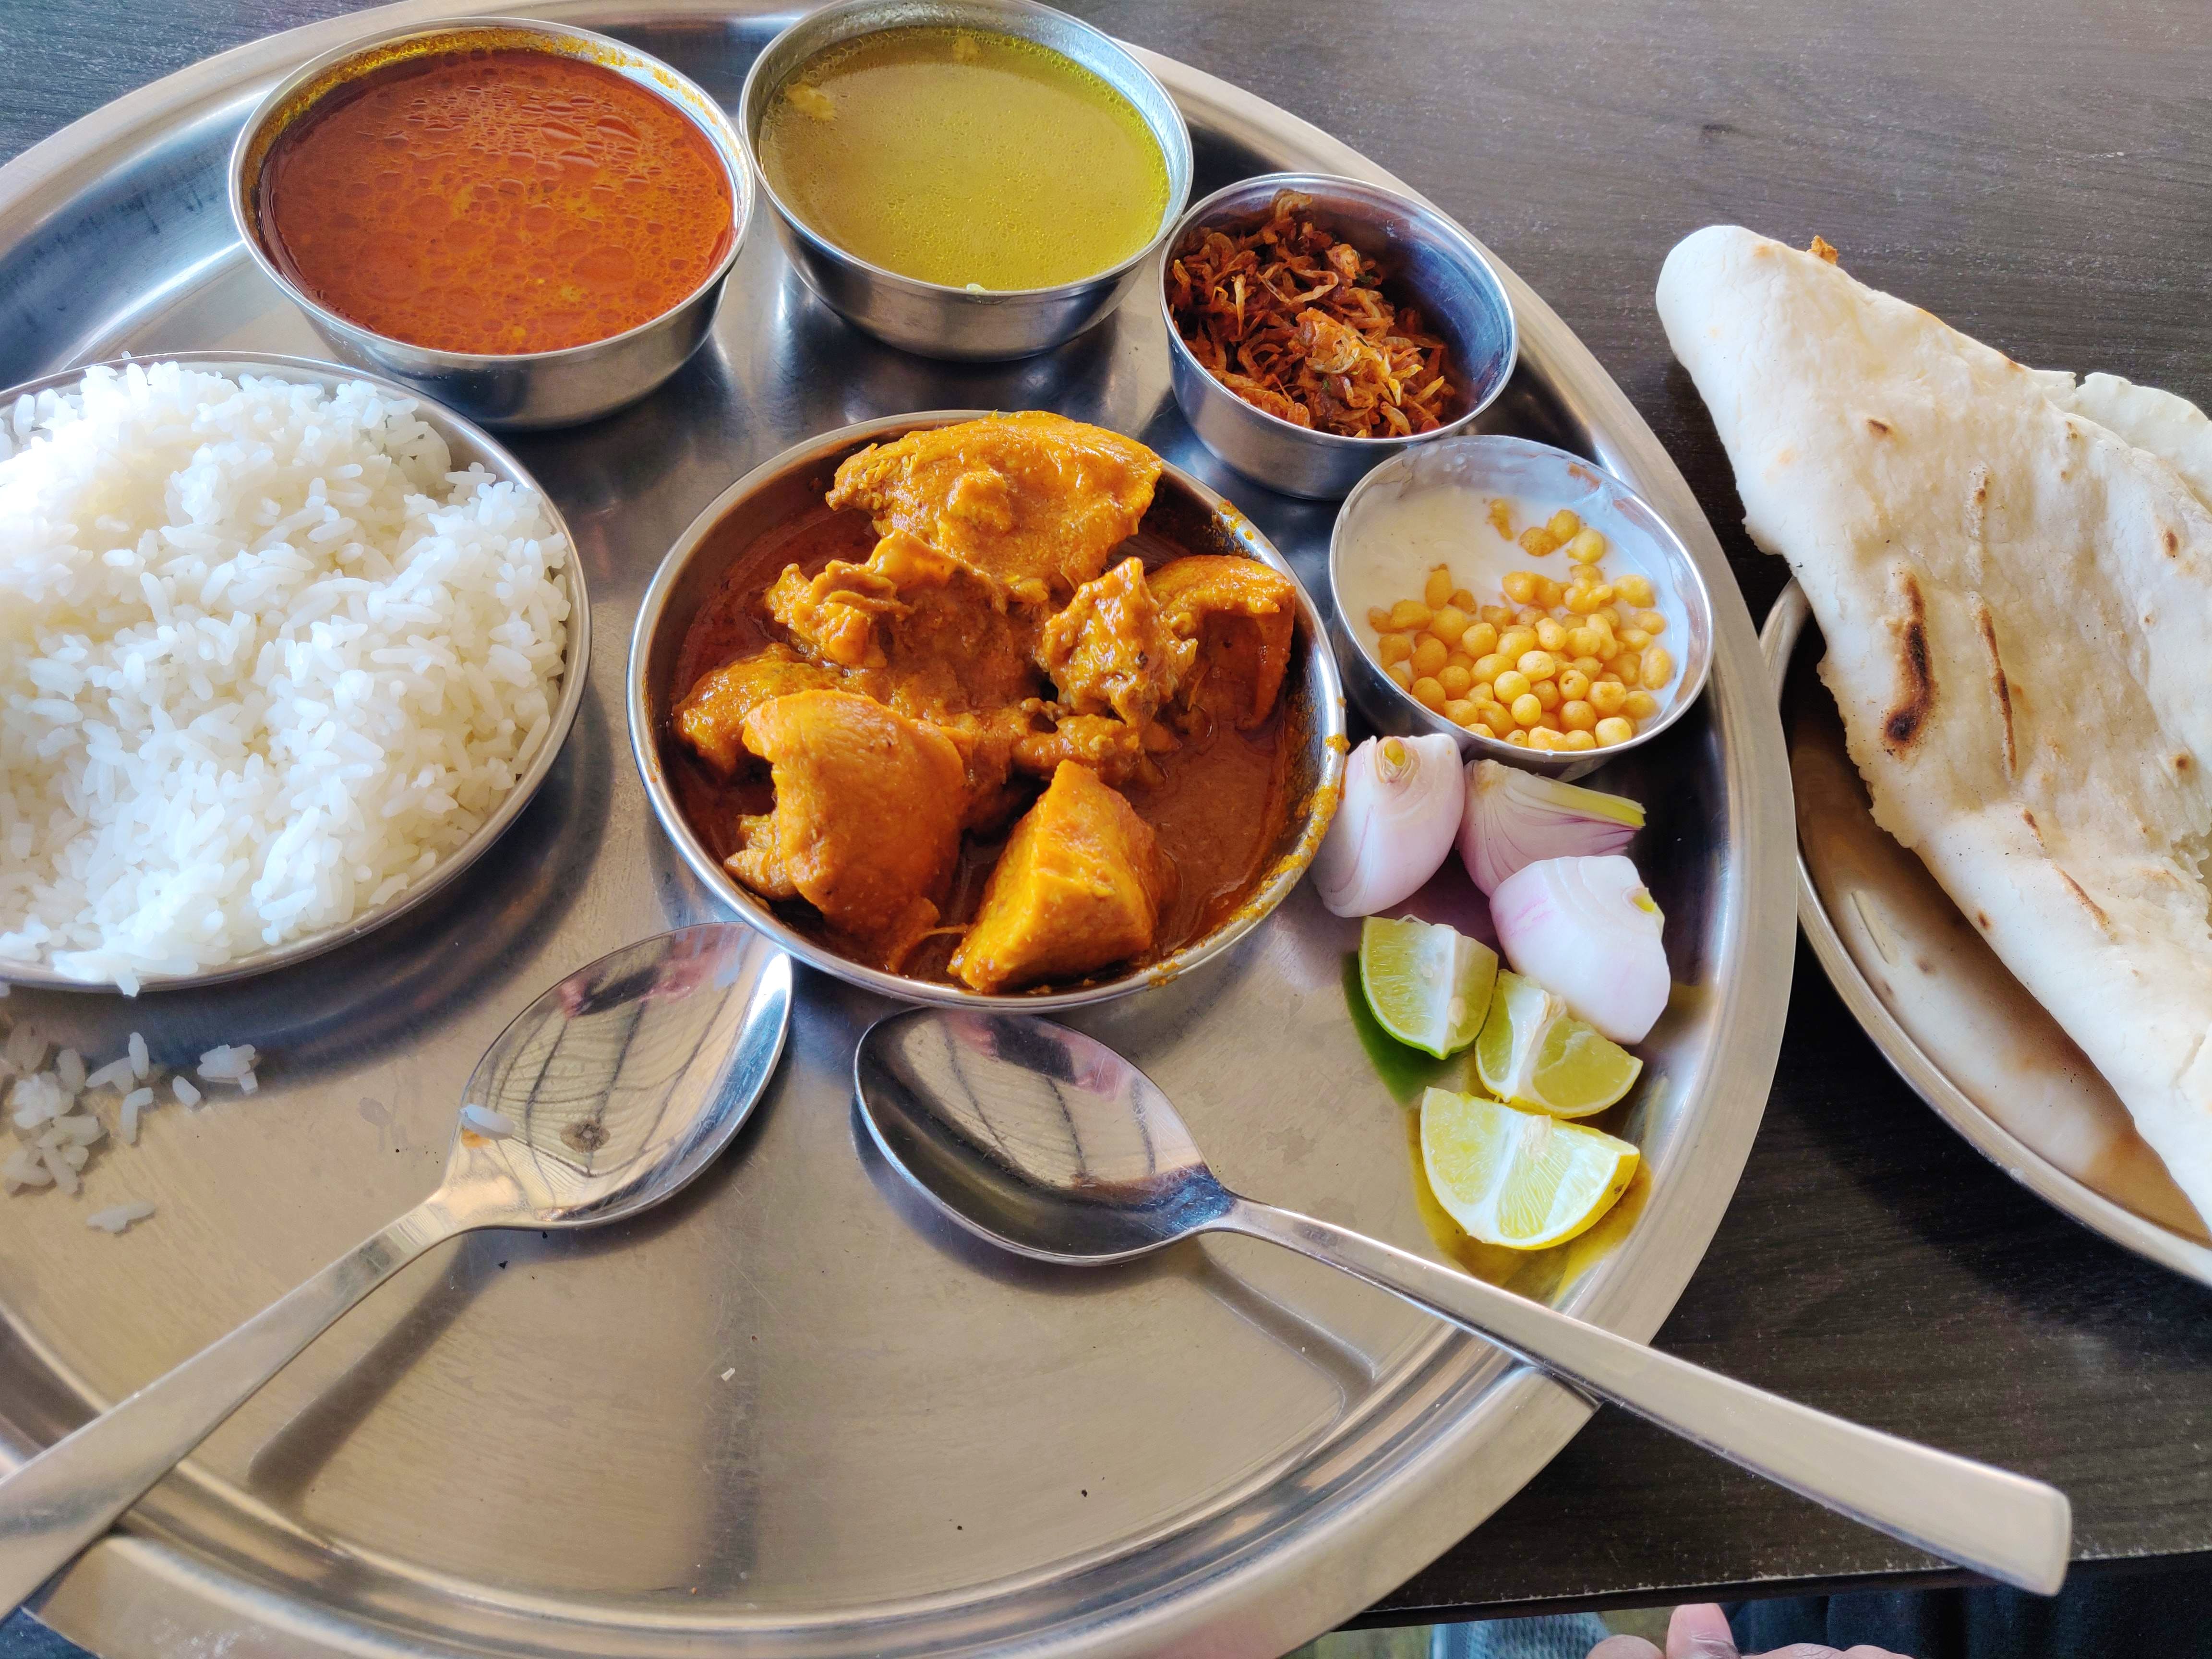 Dish,Food,Cuisine,Meal,Ingredient,Naan,Curry,Rice and curry,Nepalese cuisine,Lunch